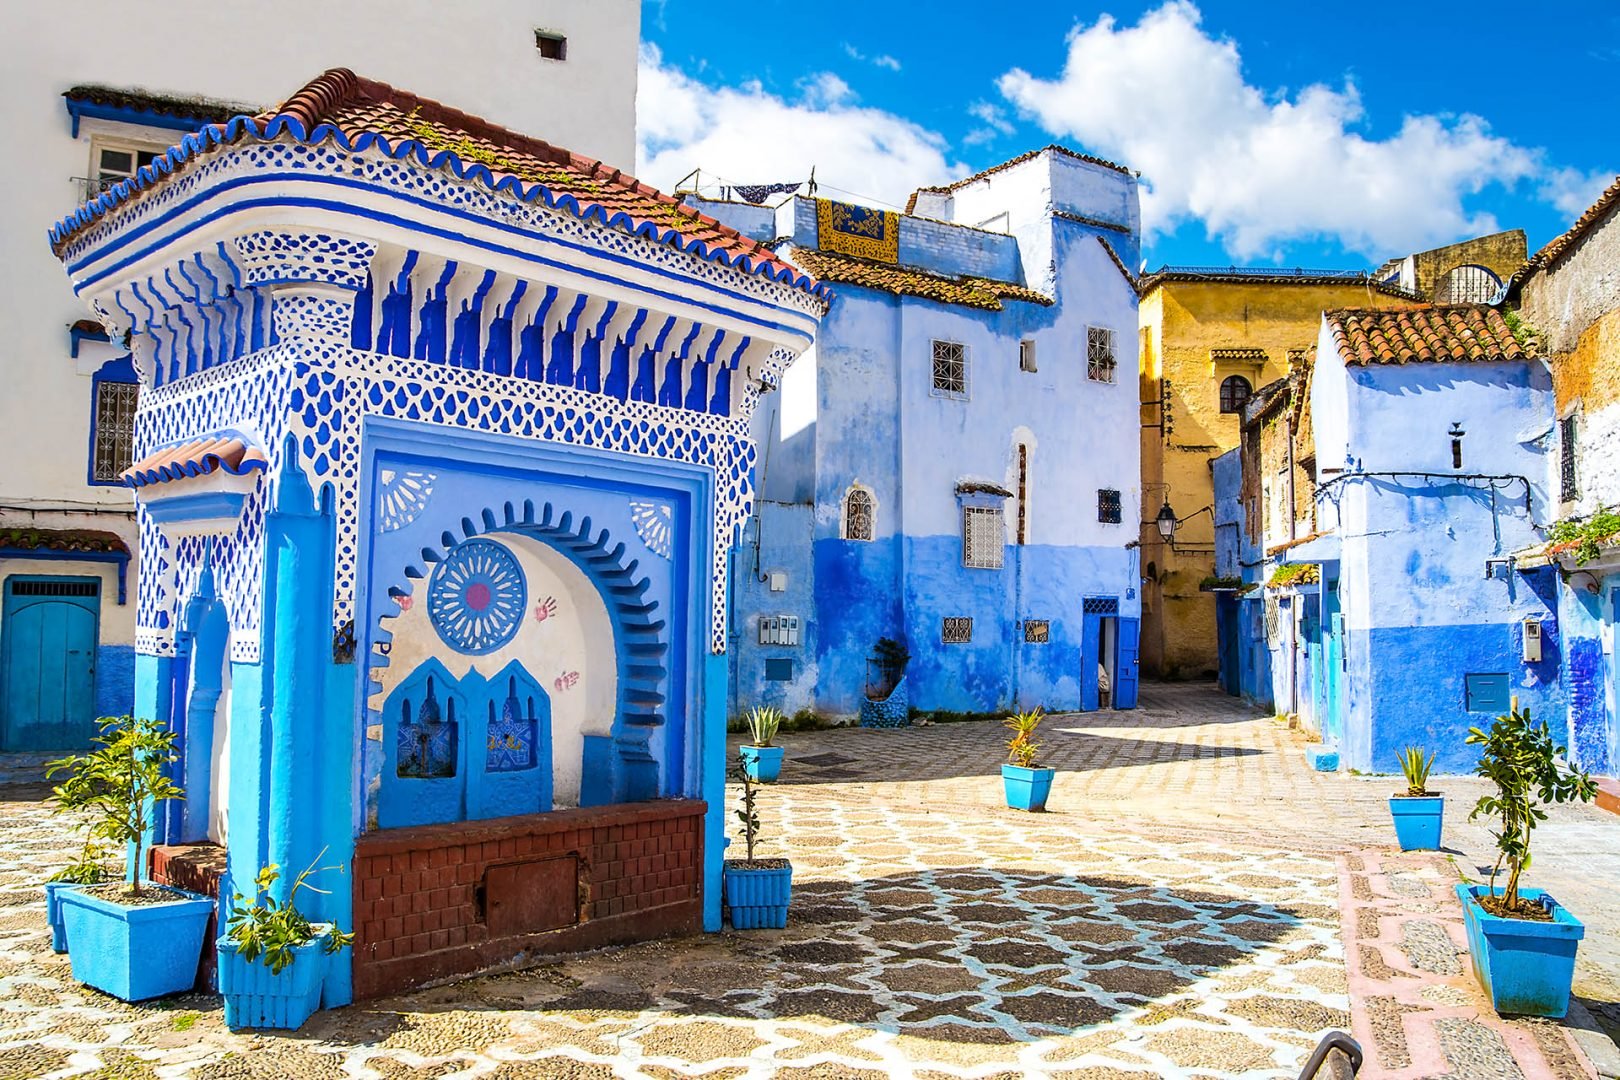 Travel to Morocco for an exciting vacation